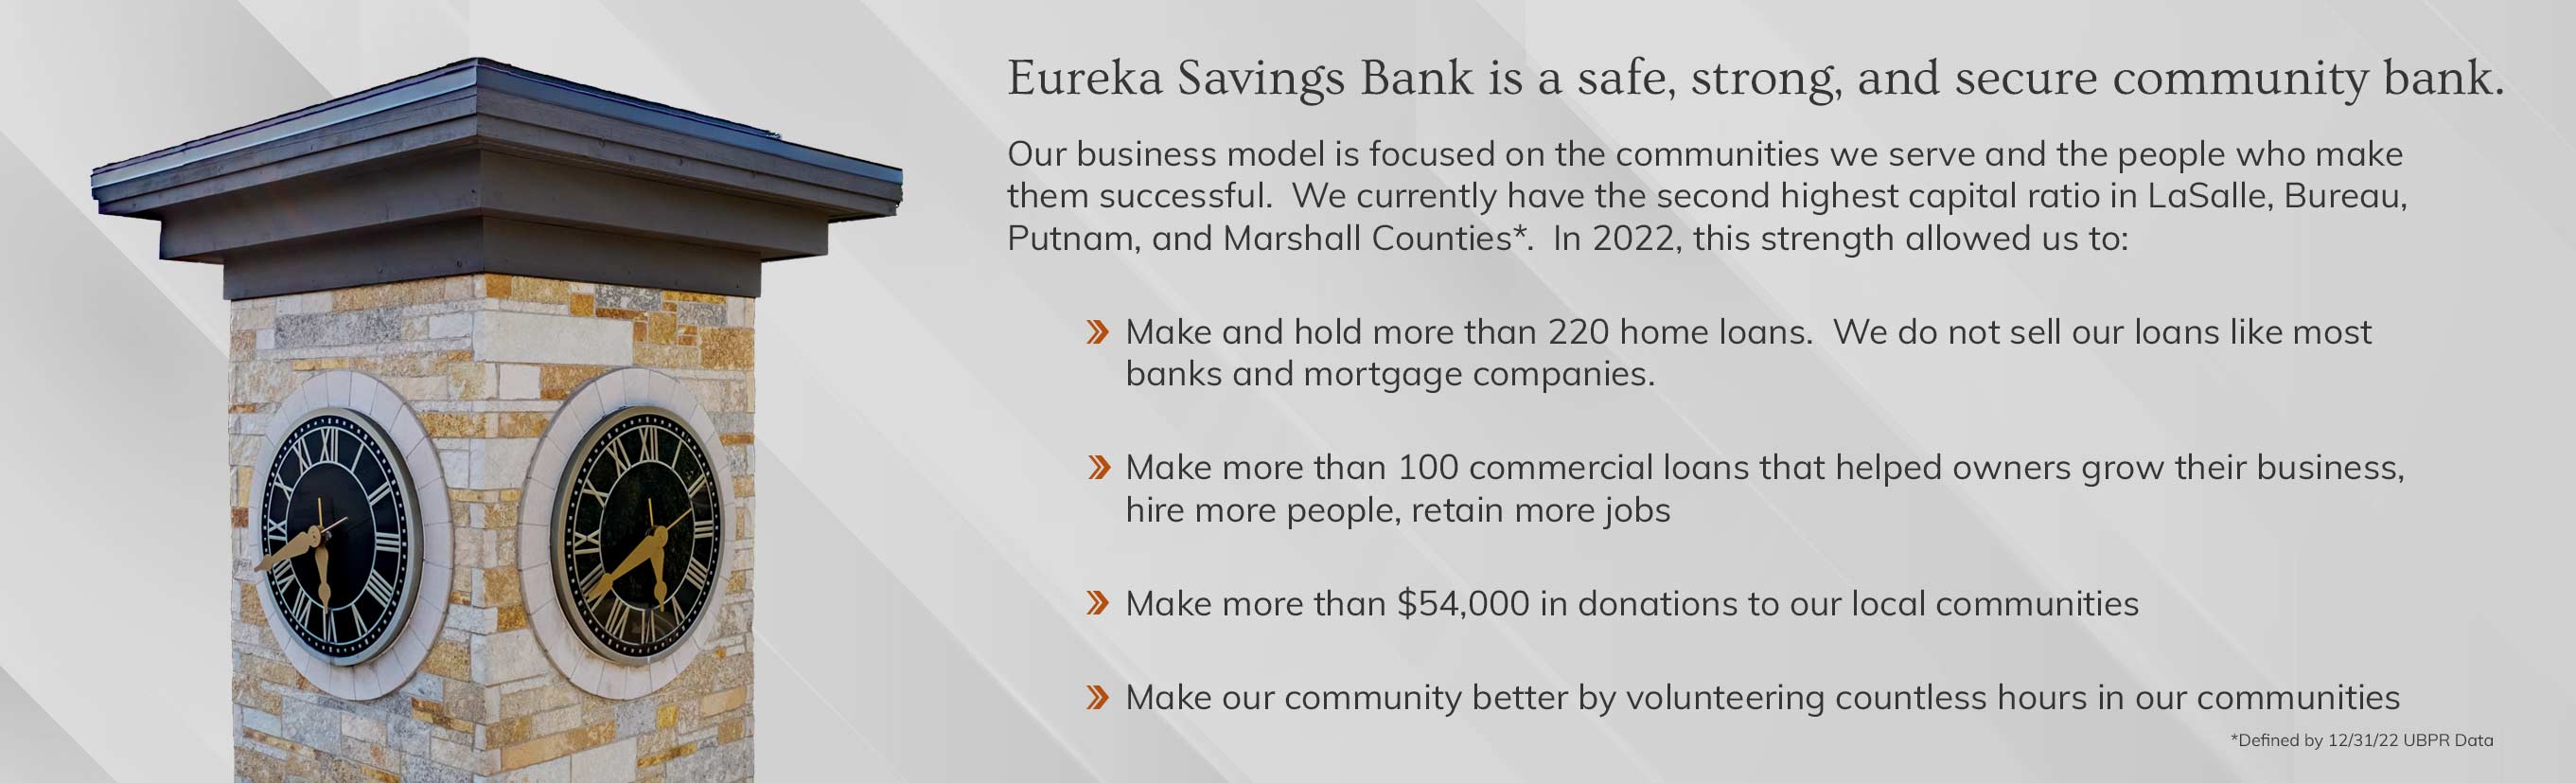 Eureka Savings Bank is a safe, strong, and secure community bank.